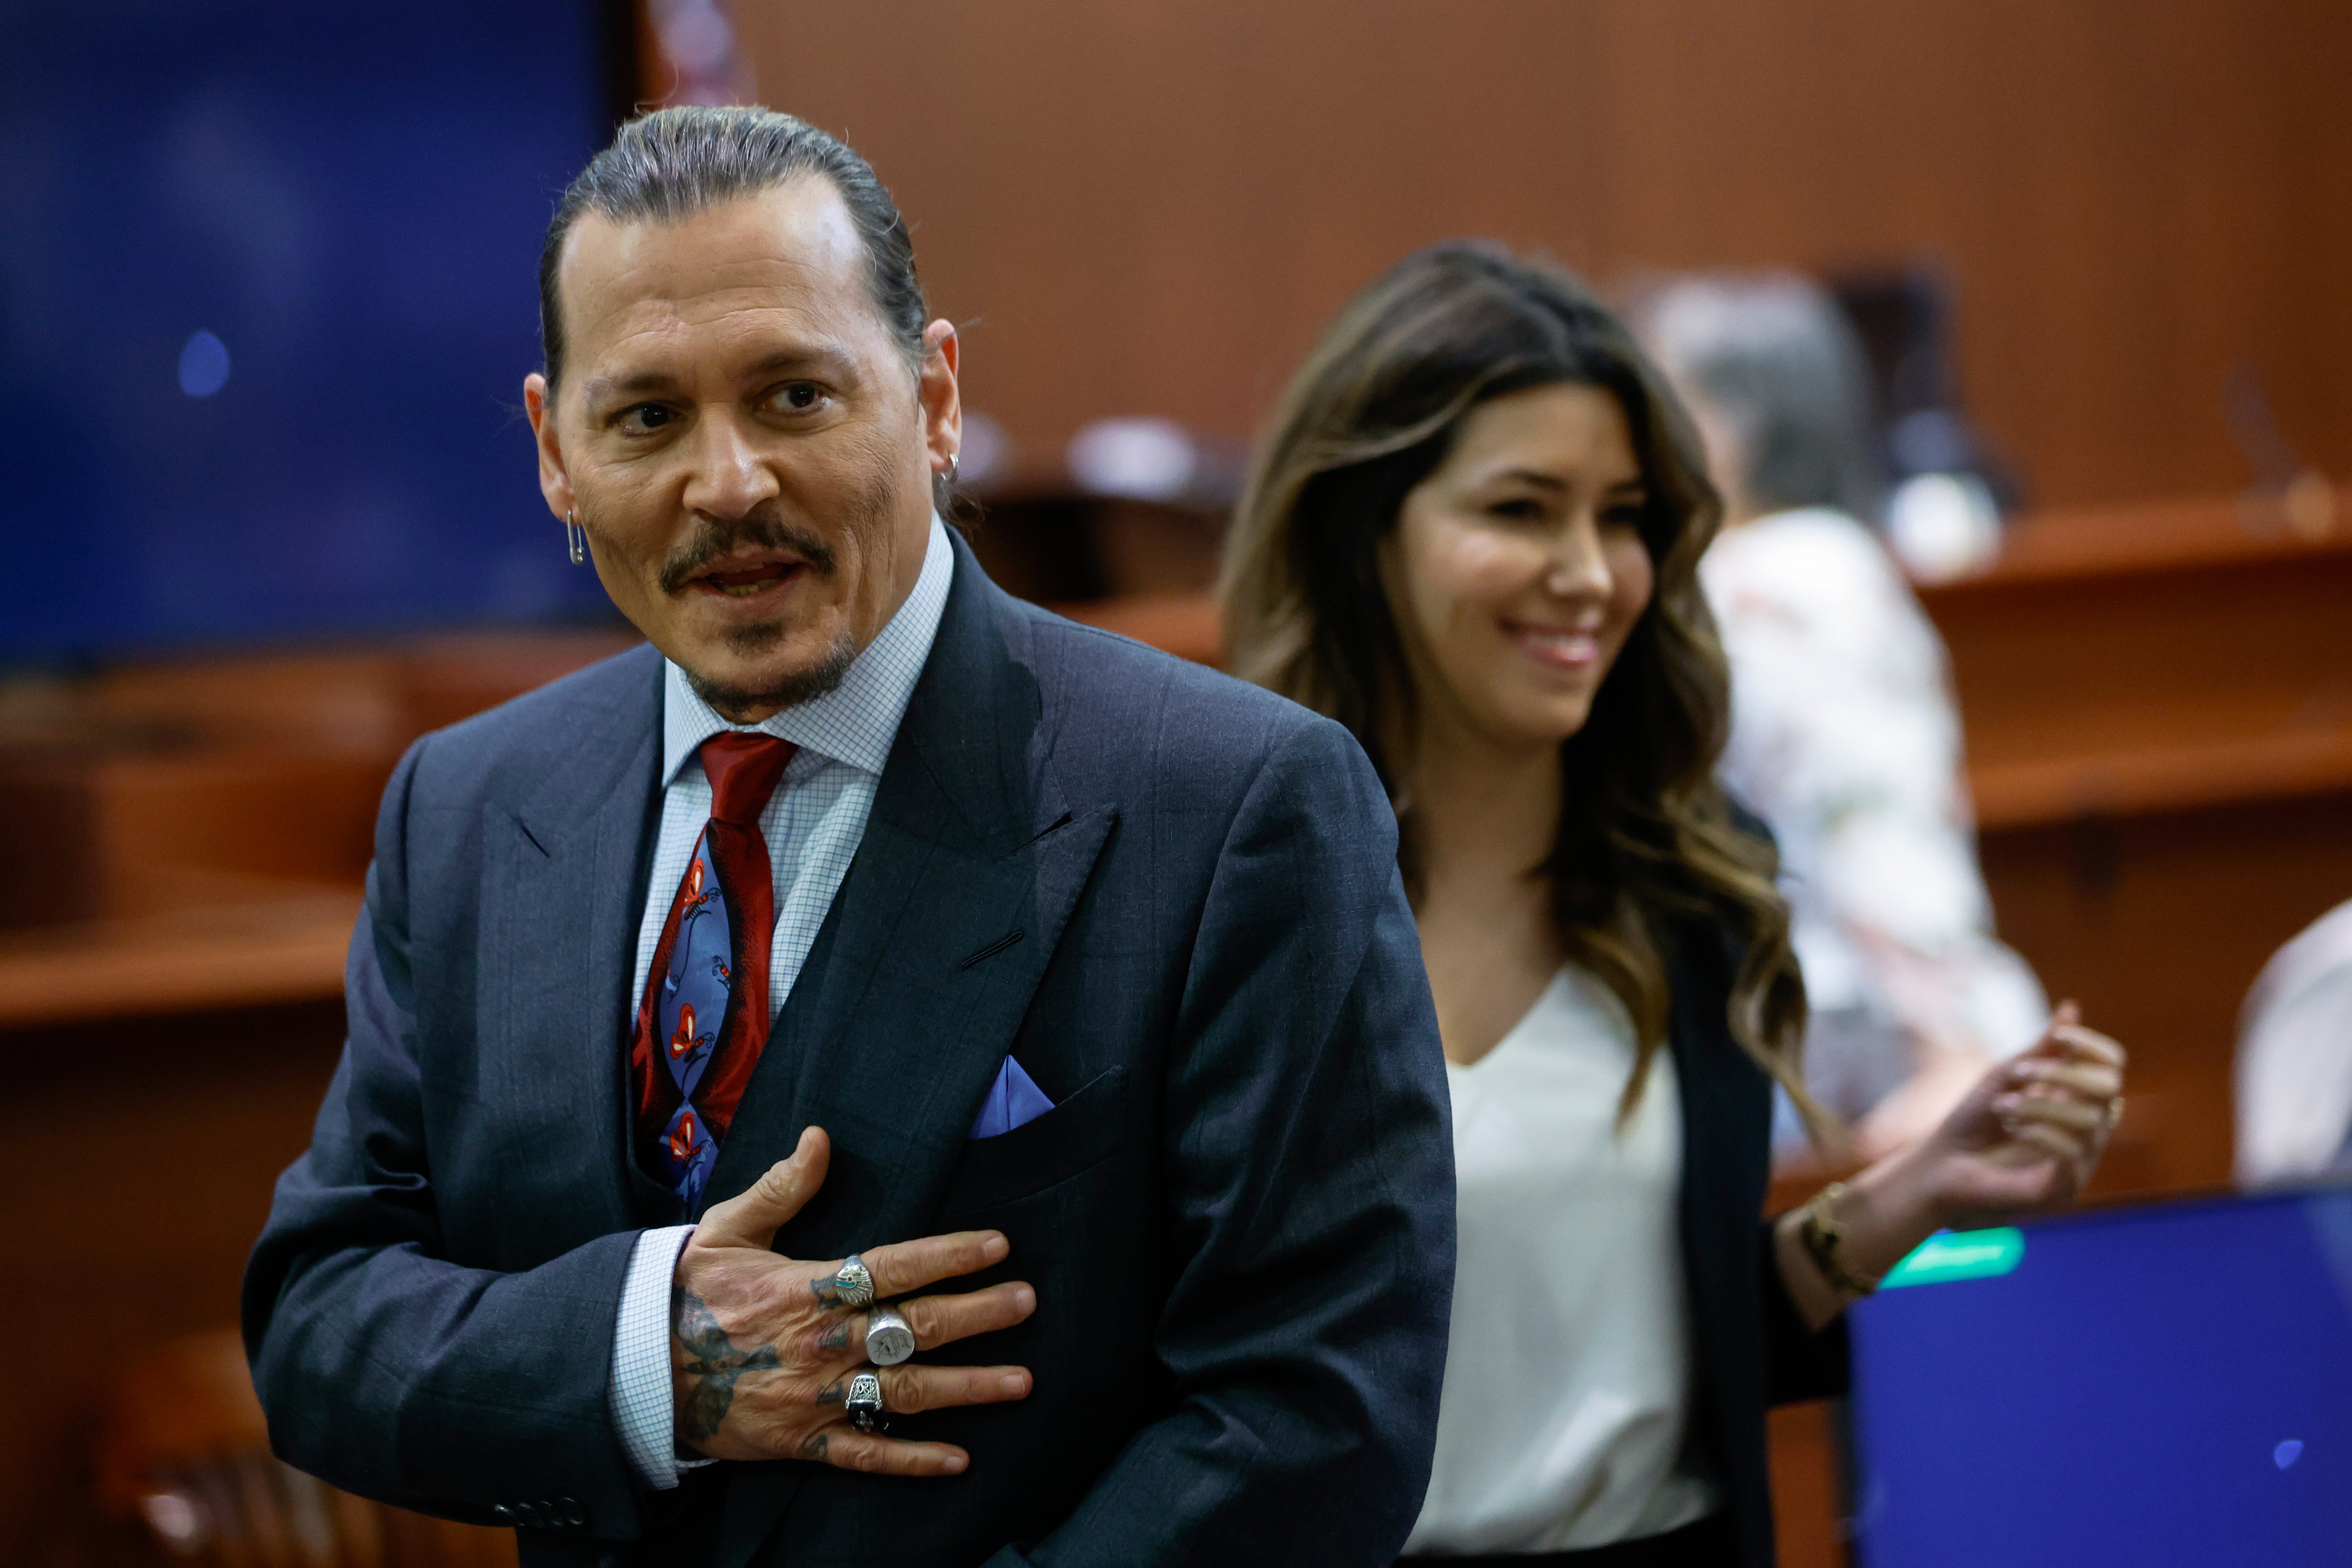 Actor Johnny Depp stands in the courtroom during a recess amid the Depp v Heard defamation trial at the Fairfax County Circuit Courthouse in Fairfax, Virginia, USA, 27 April 2022